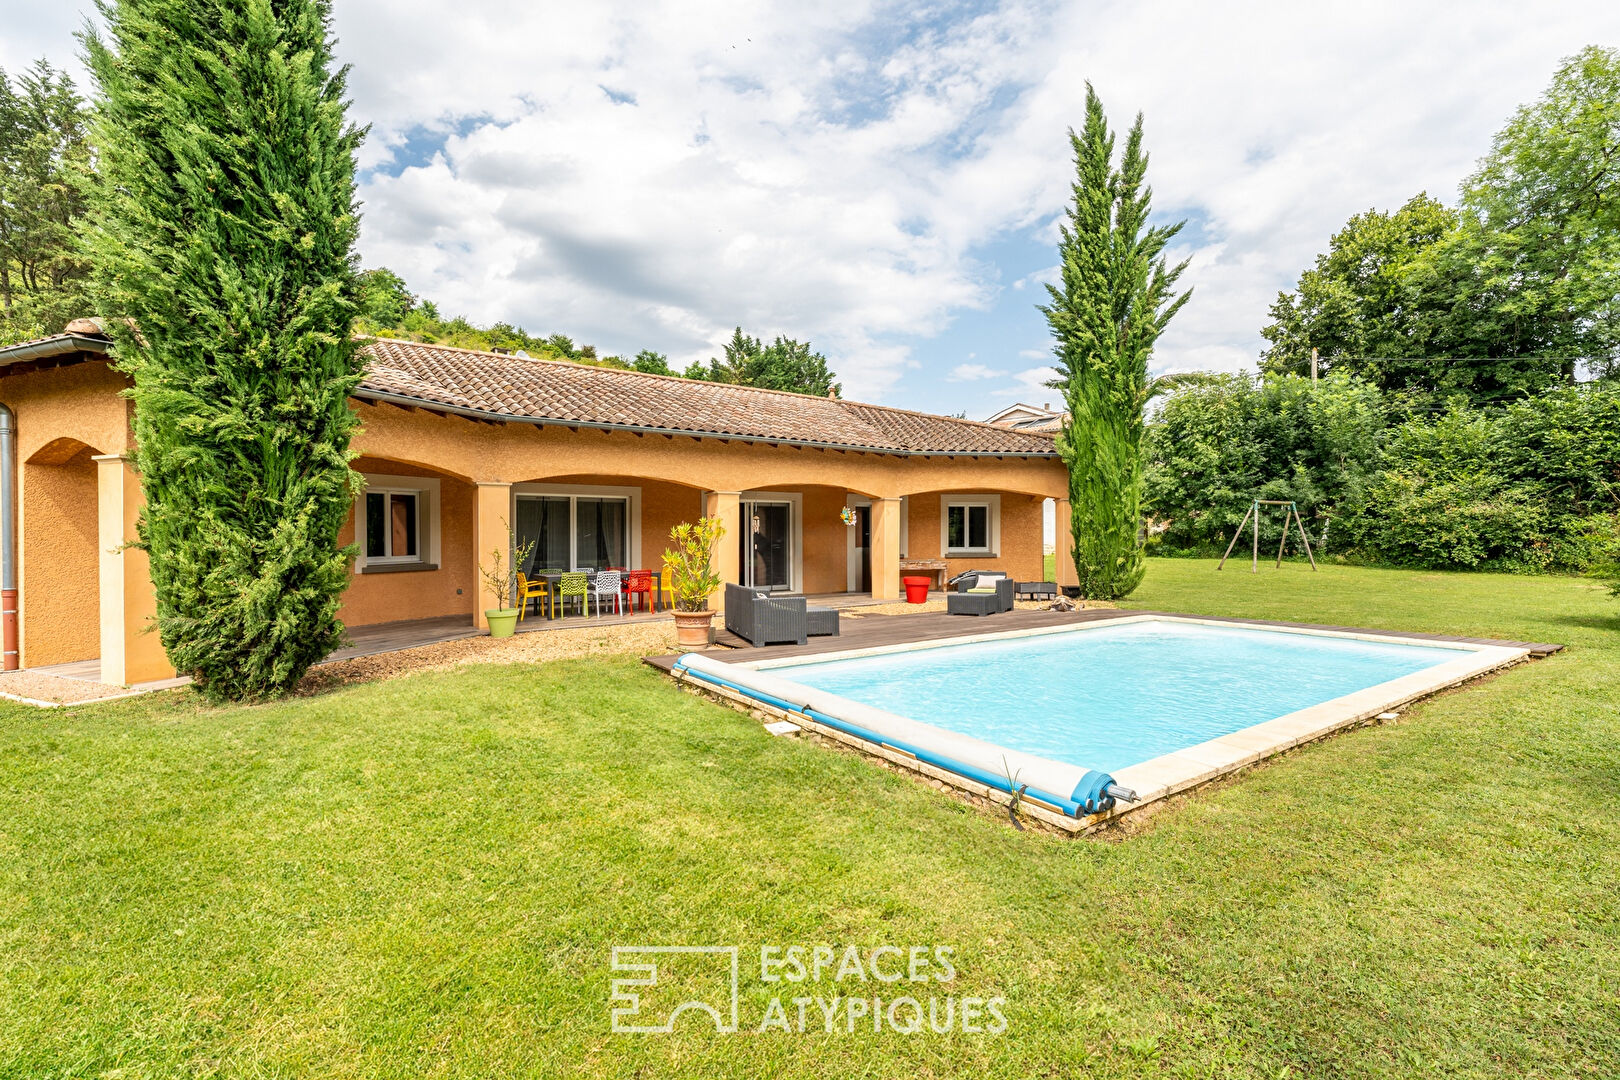 Single-storey villa with swimming pool in the heart of Beaujolais